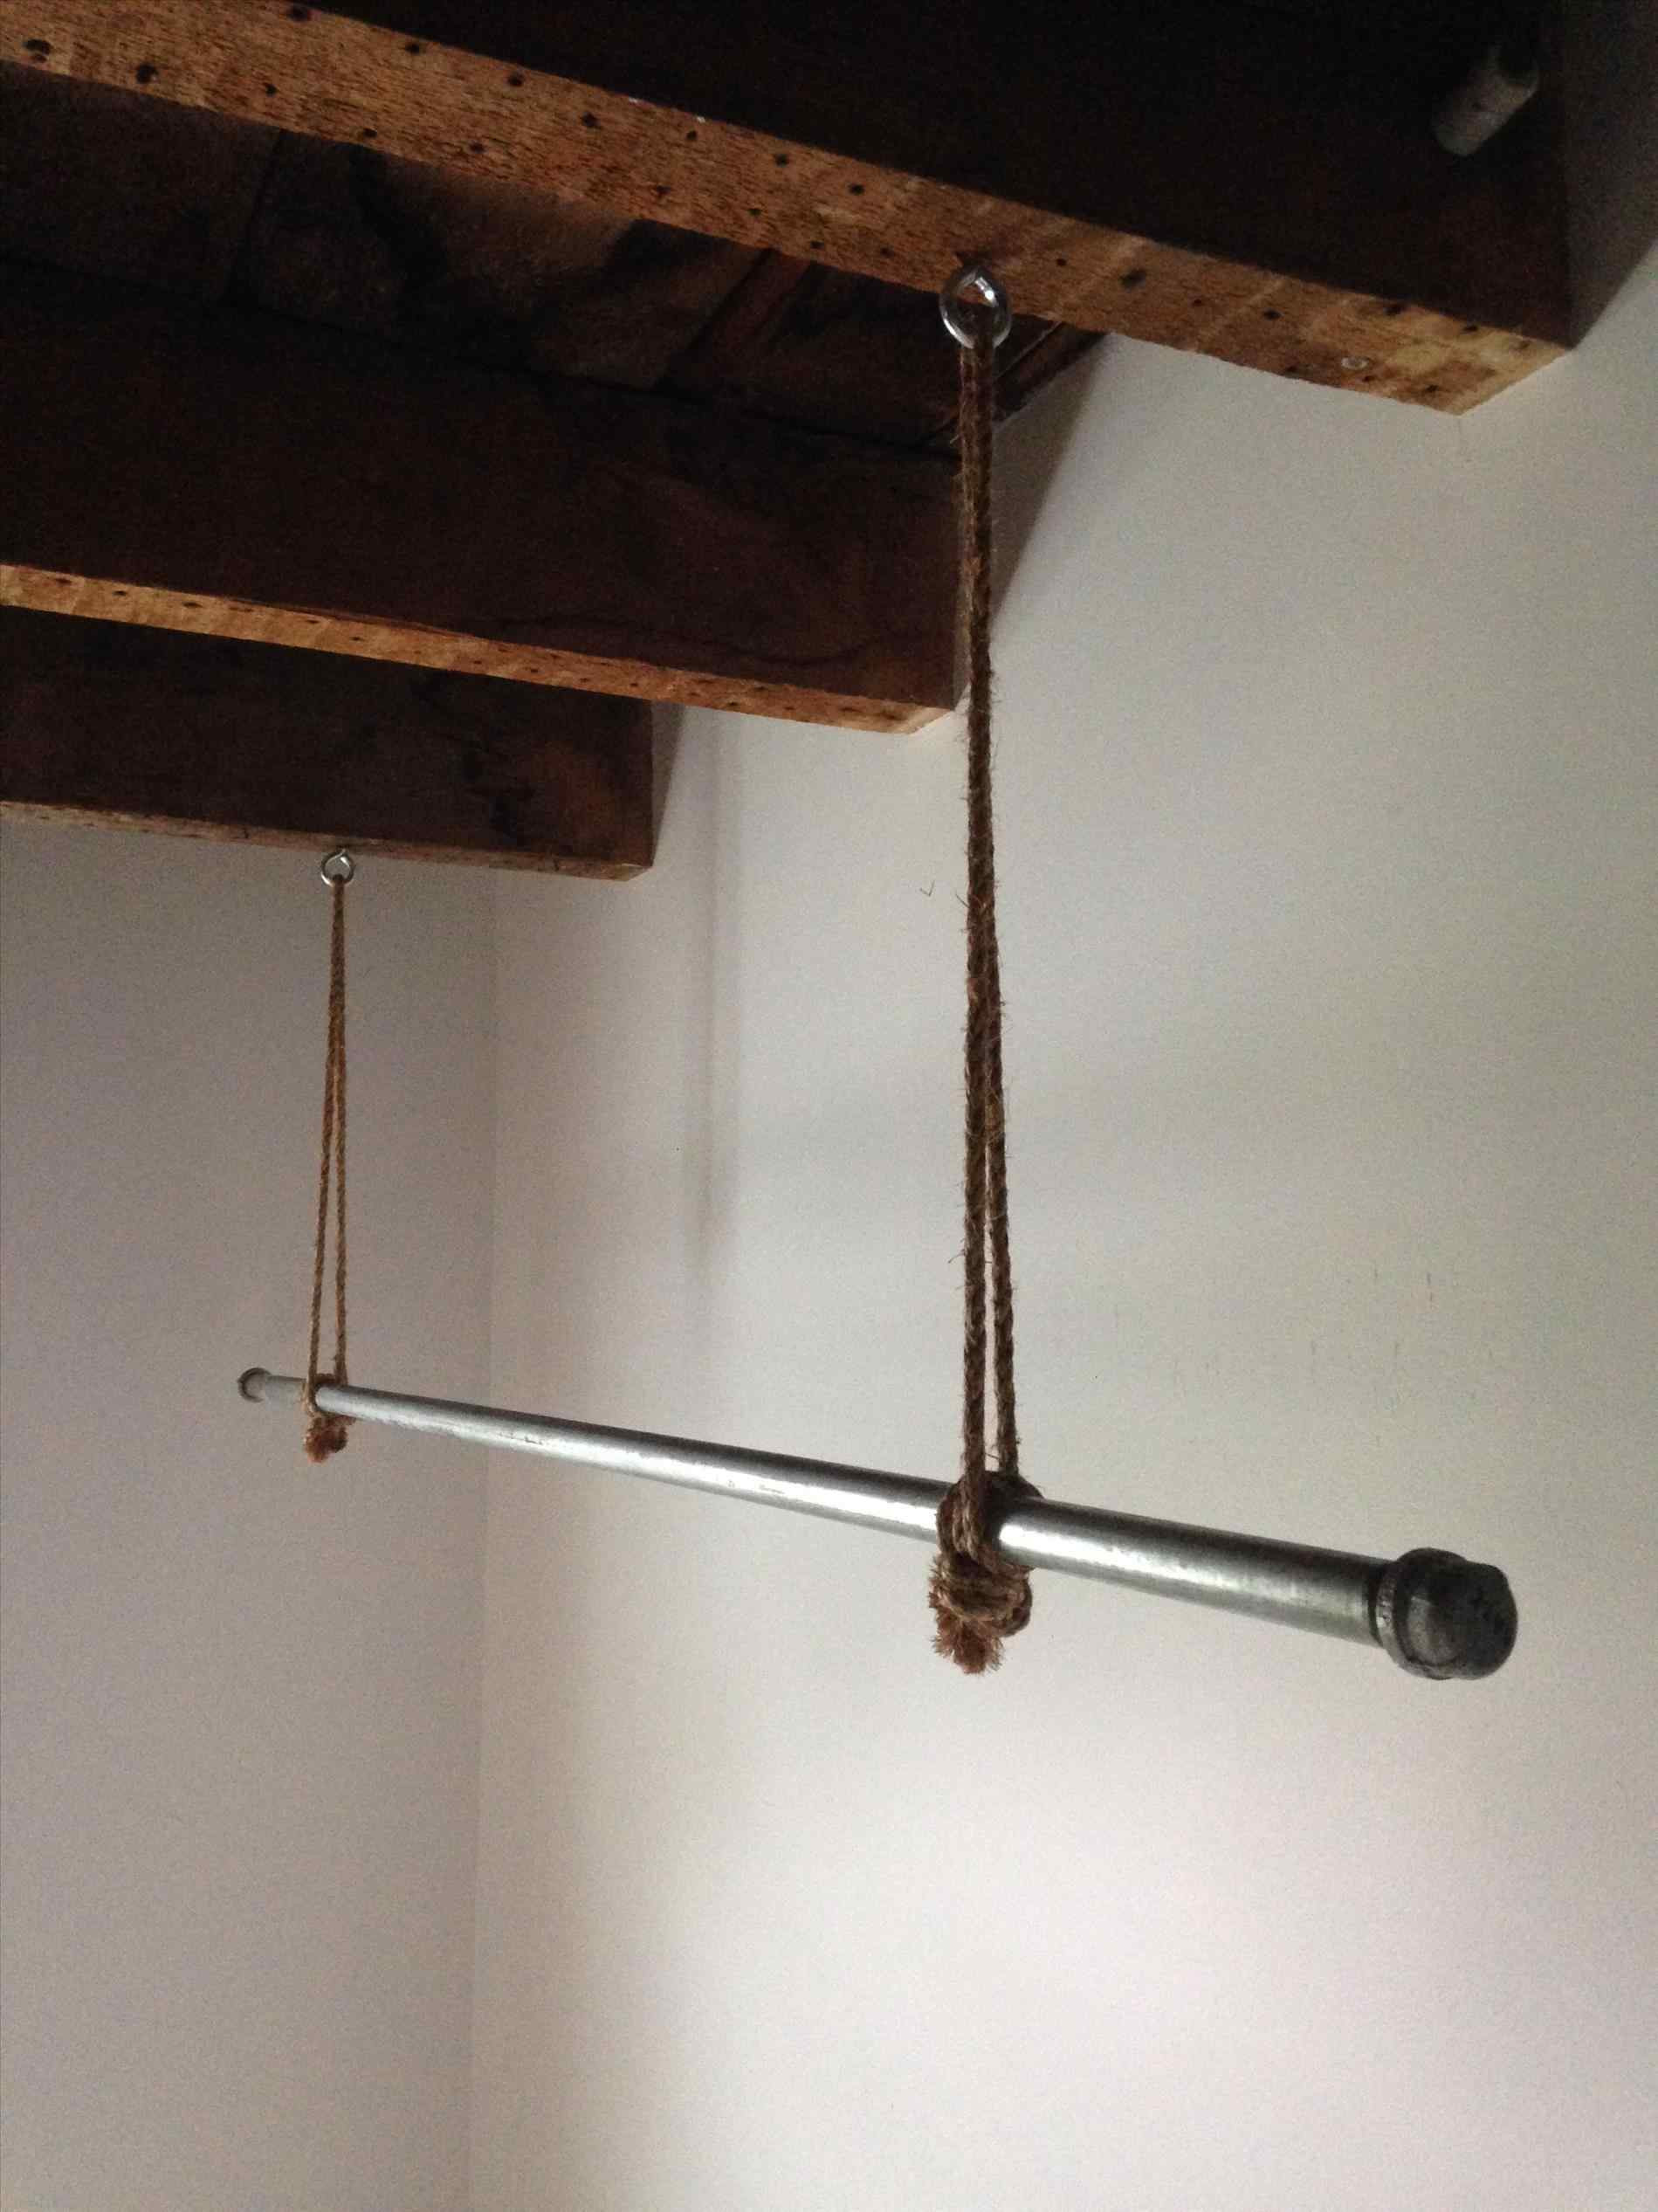 DIY Hanging Clothes Rack From Ceiling
 Clothes Rod From Ceiling Solution To A Closetless Room